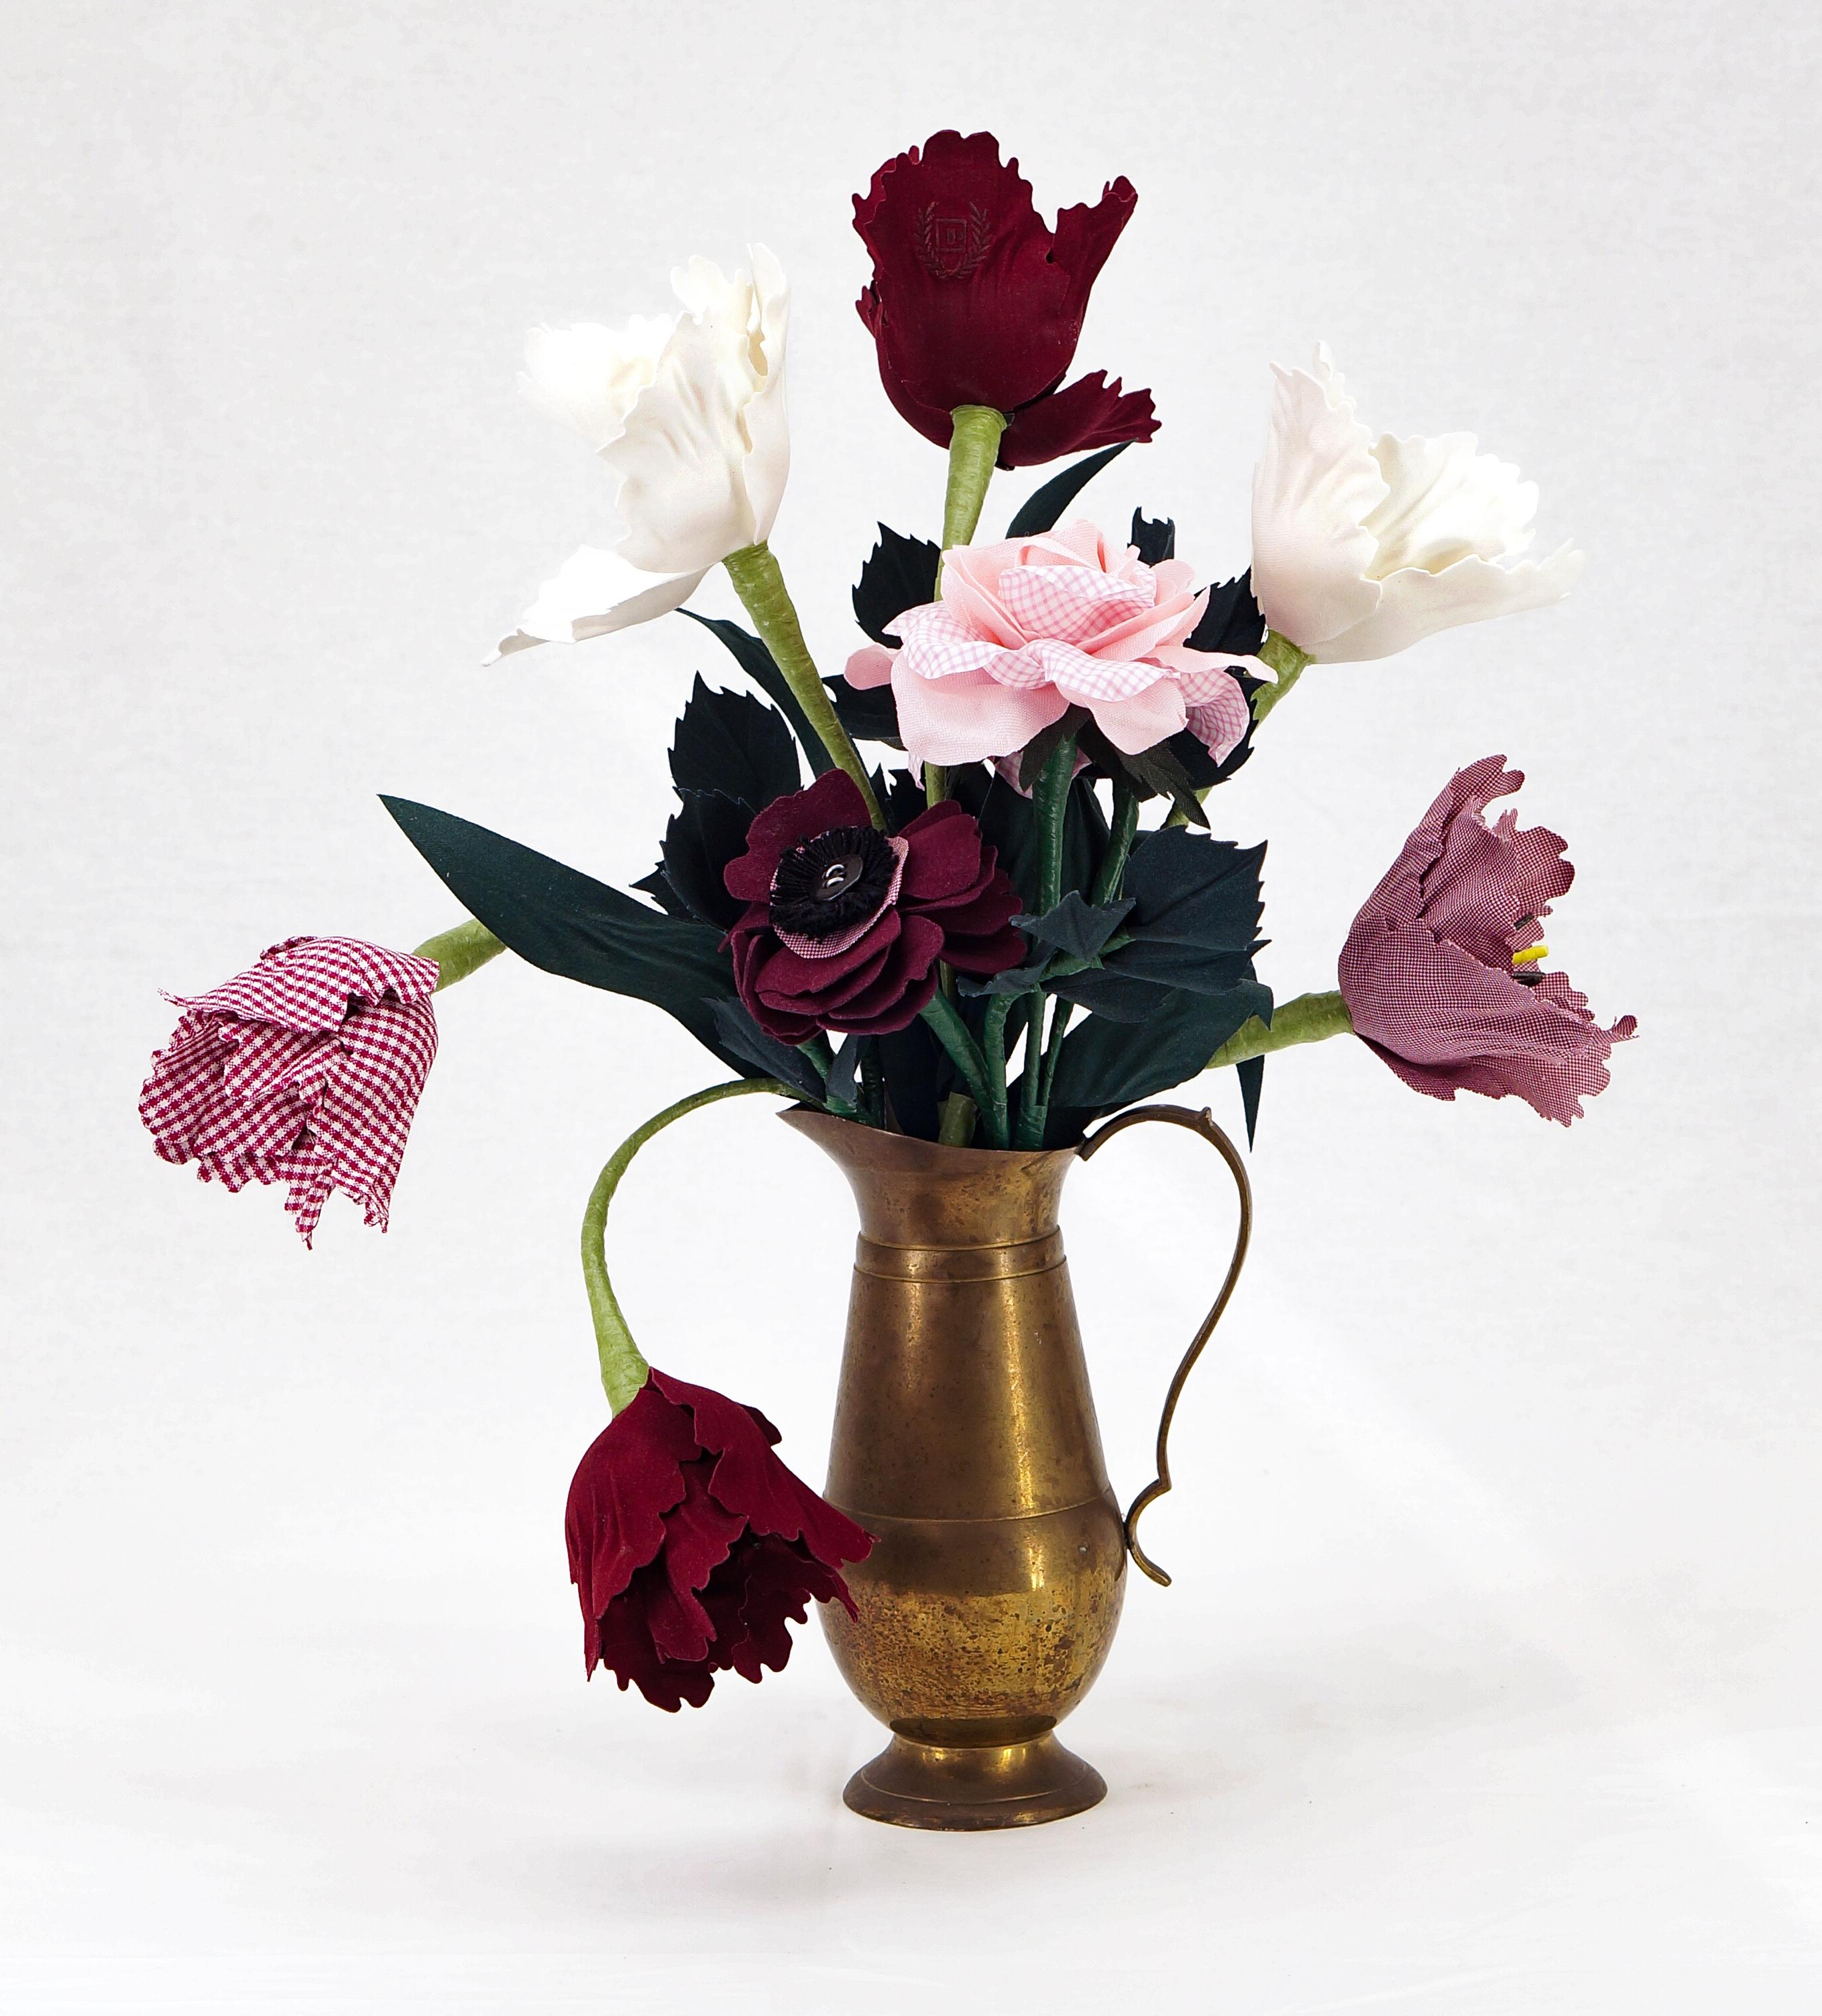 Vase with Roses and Parrot Tulips - Sculpture by Carlton Scott Sturgill